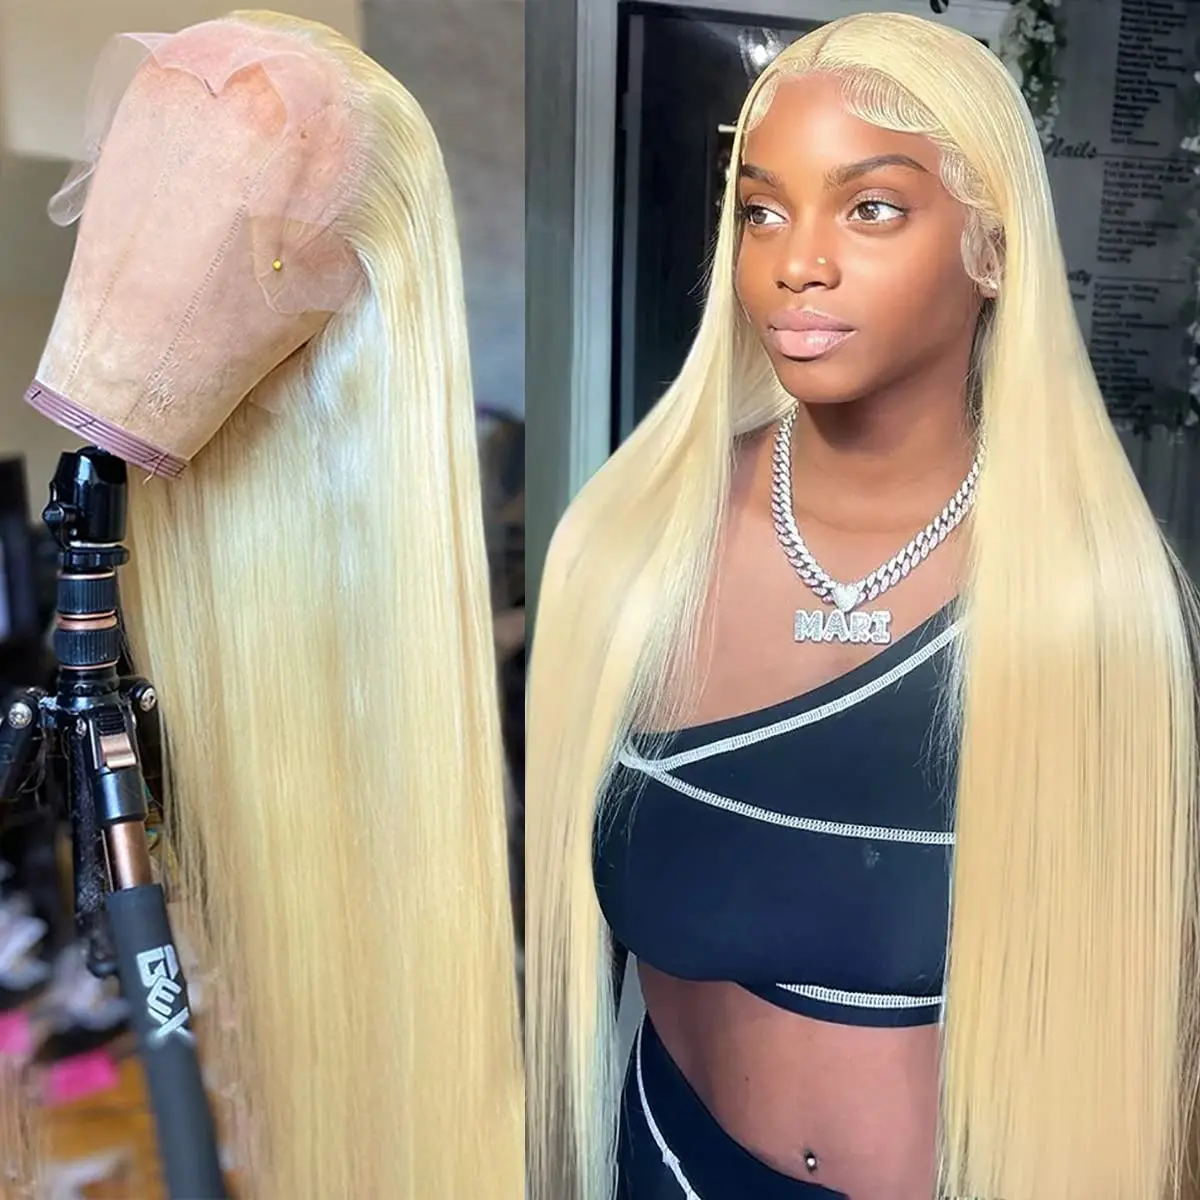 

613 Lace Frontal Wig 13x6 Straight Human Hair Wigs Pre Plucked Bleached Knots Bling Remy 13x4 Blonde Lace Front Human Hair Wigs